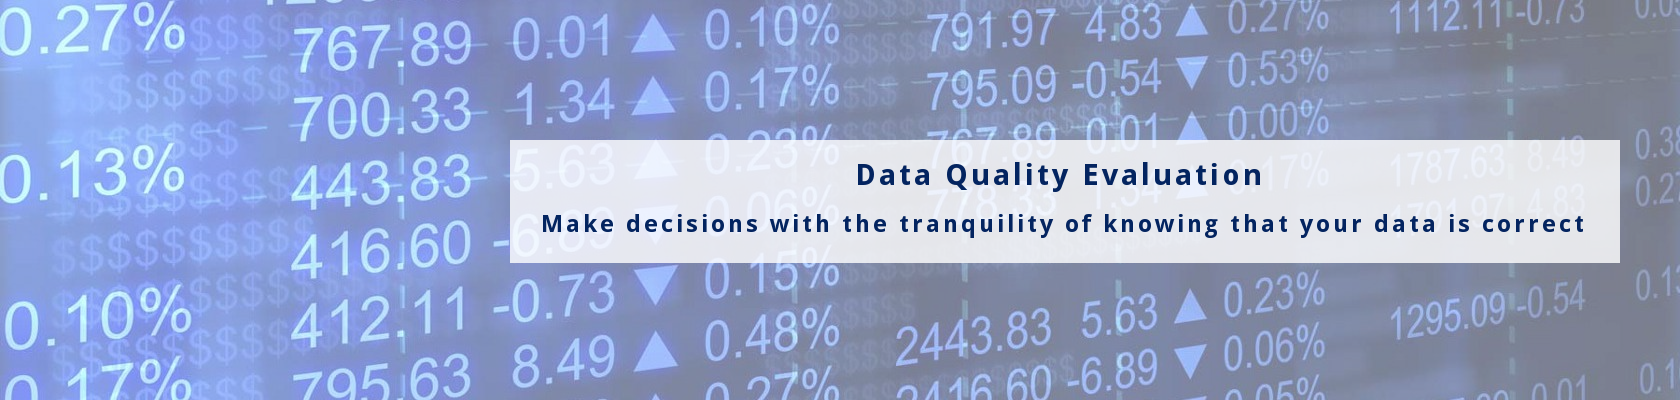 Data Quality - ISO/IEC 25000